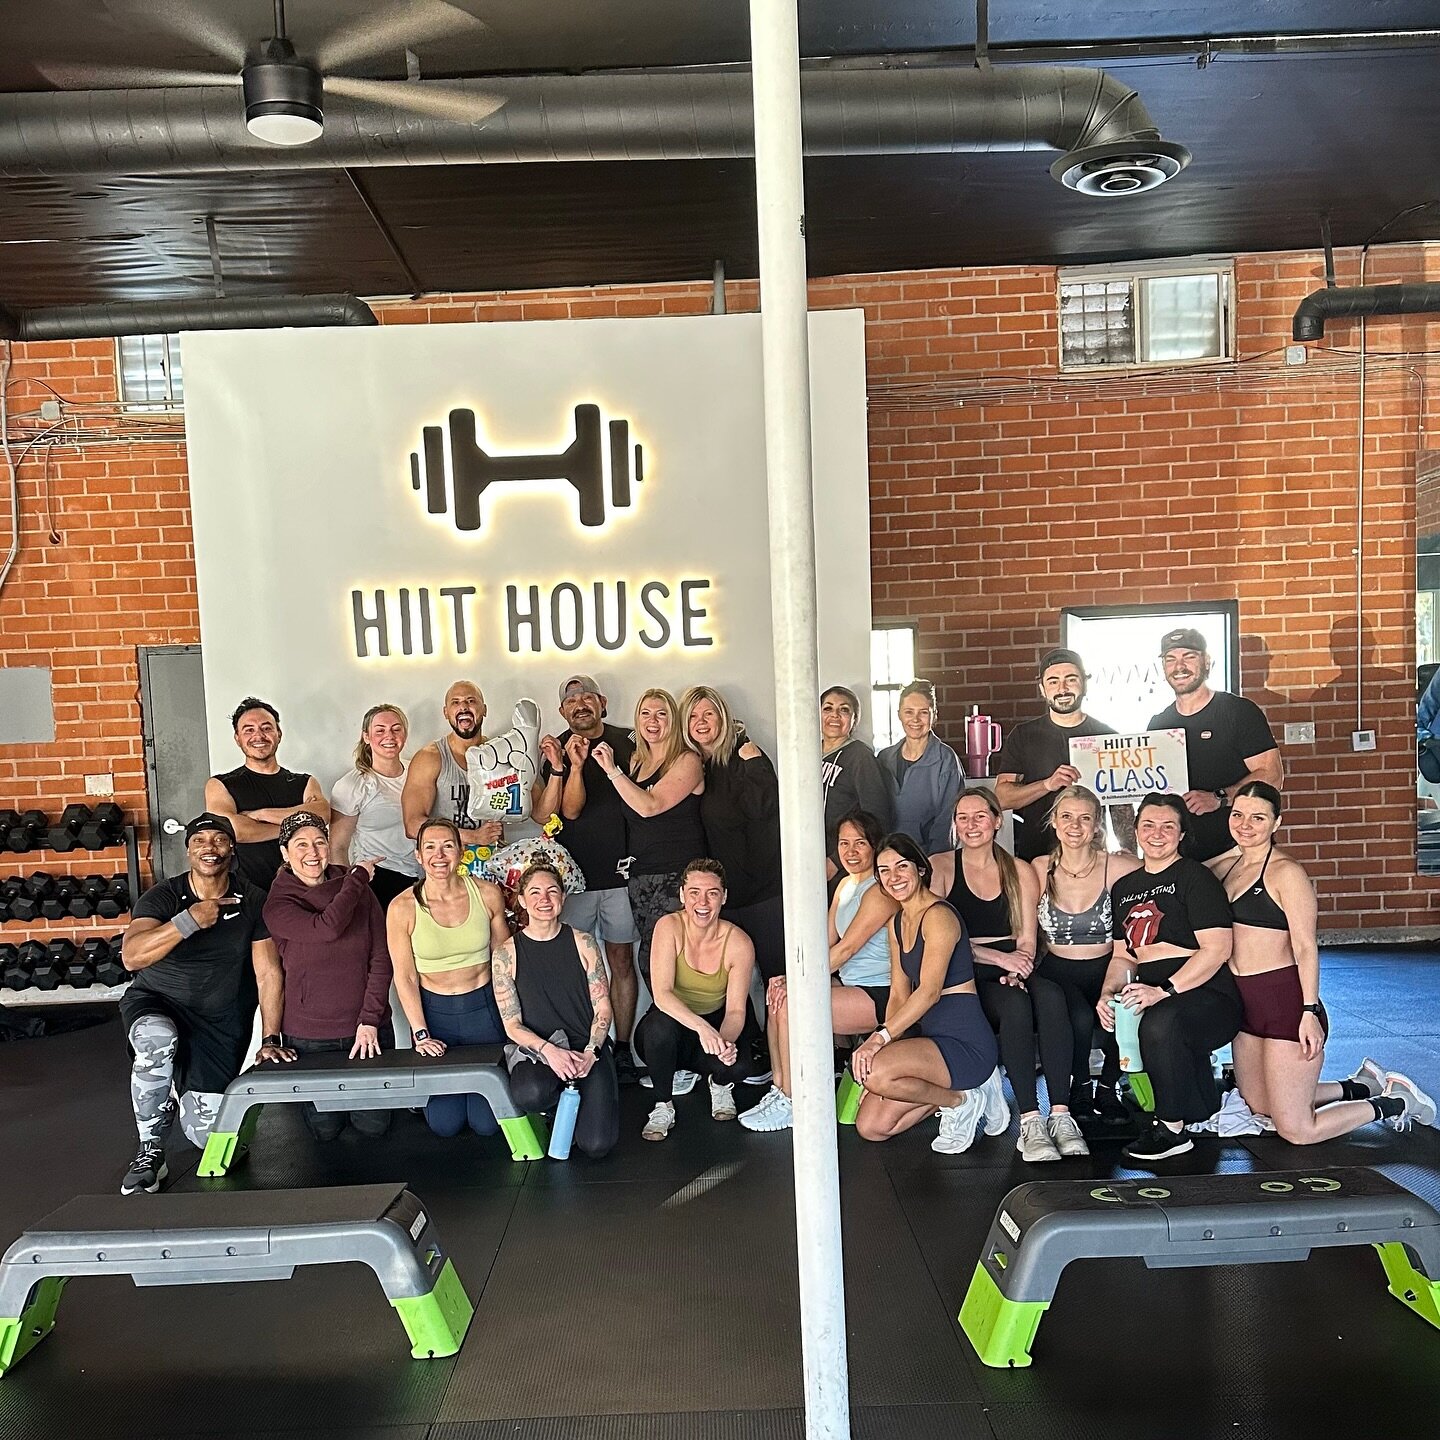 MAJOR CONGRATS to @israelorozcolugo for completing  1,000 CLASSES here at HIIT HOUSE!🥳👏🏻💪🏻 You absolutely crush it in every single class you take and we are so happy to be apart of your incredible fitness journey! TO 1,000 MORE CLASSES 💪🏻 !!!!